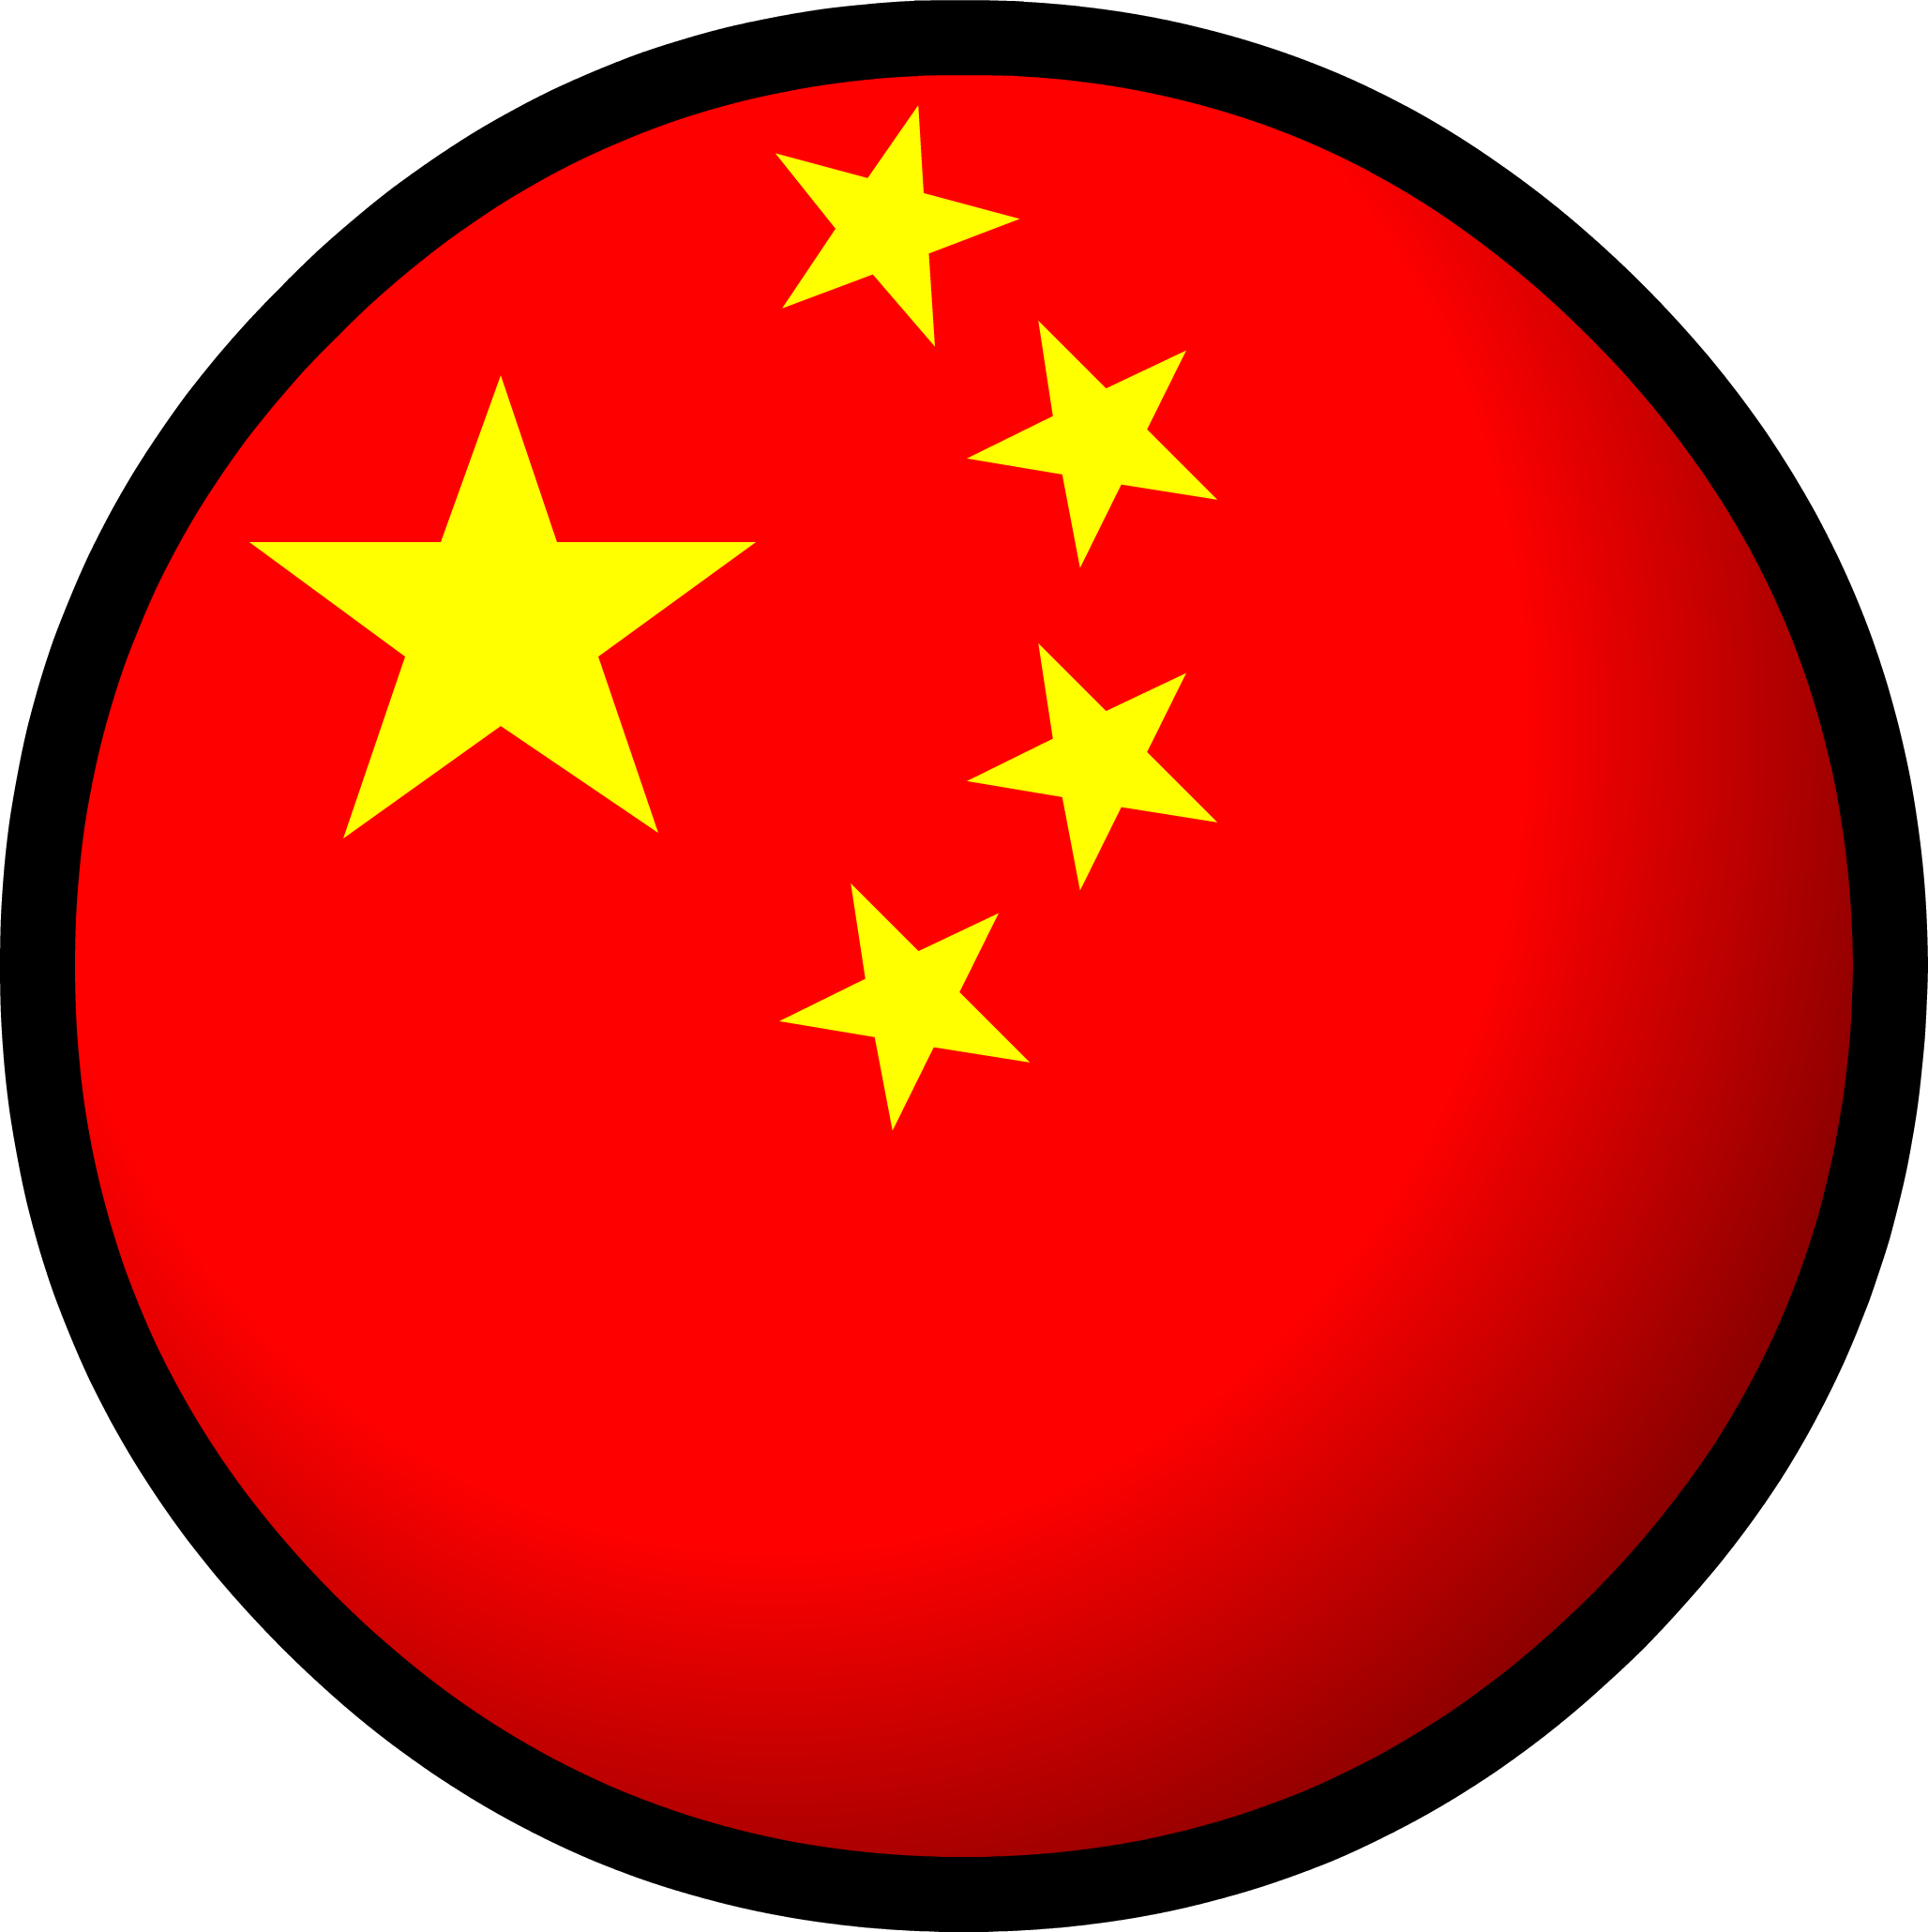 A Red Ball With Yellow Stars